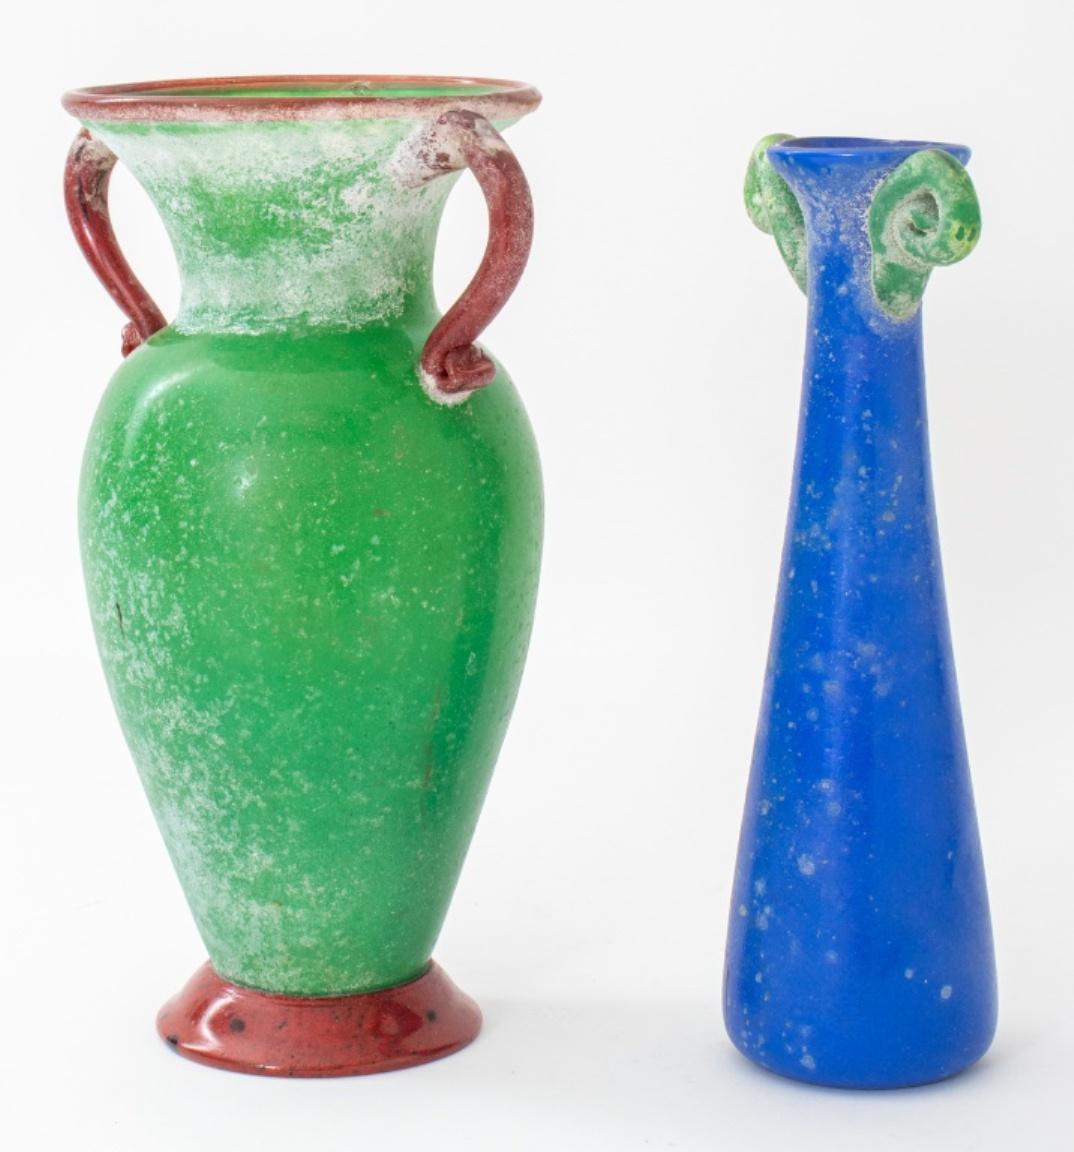 Pair of Ancient Roman style vitreous glass amphora vases with handles, largest in green and brown tones with chip to base, thinner in blue and green tones, apparently unsigned. Largest